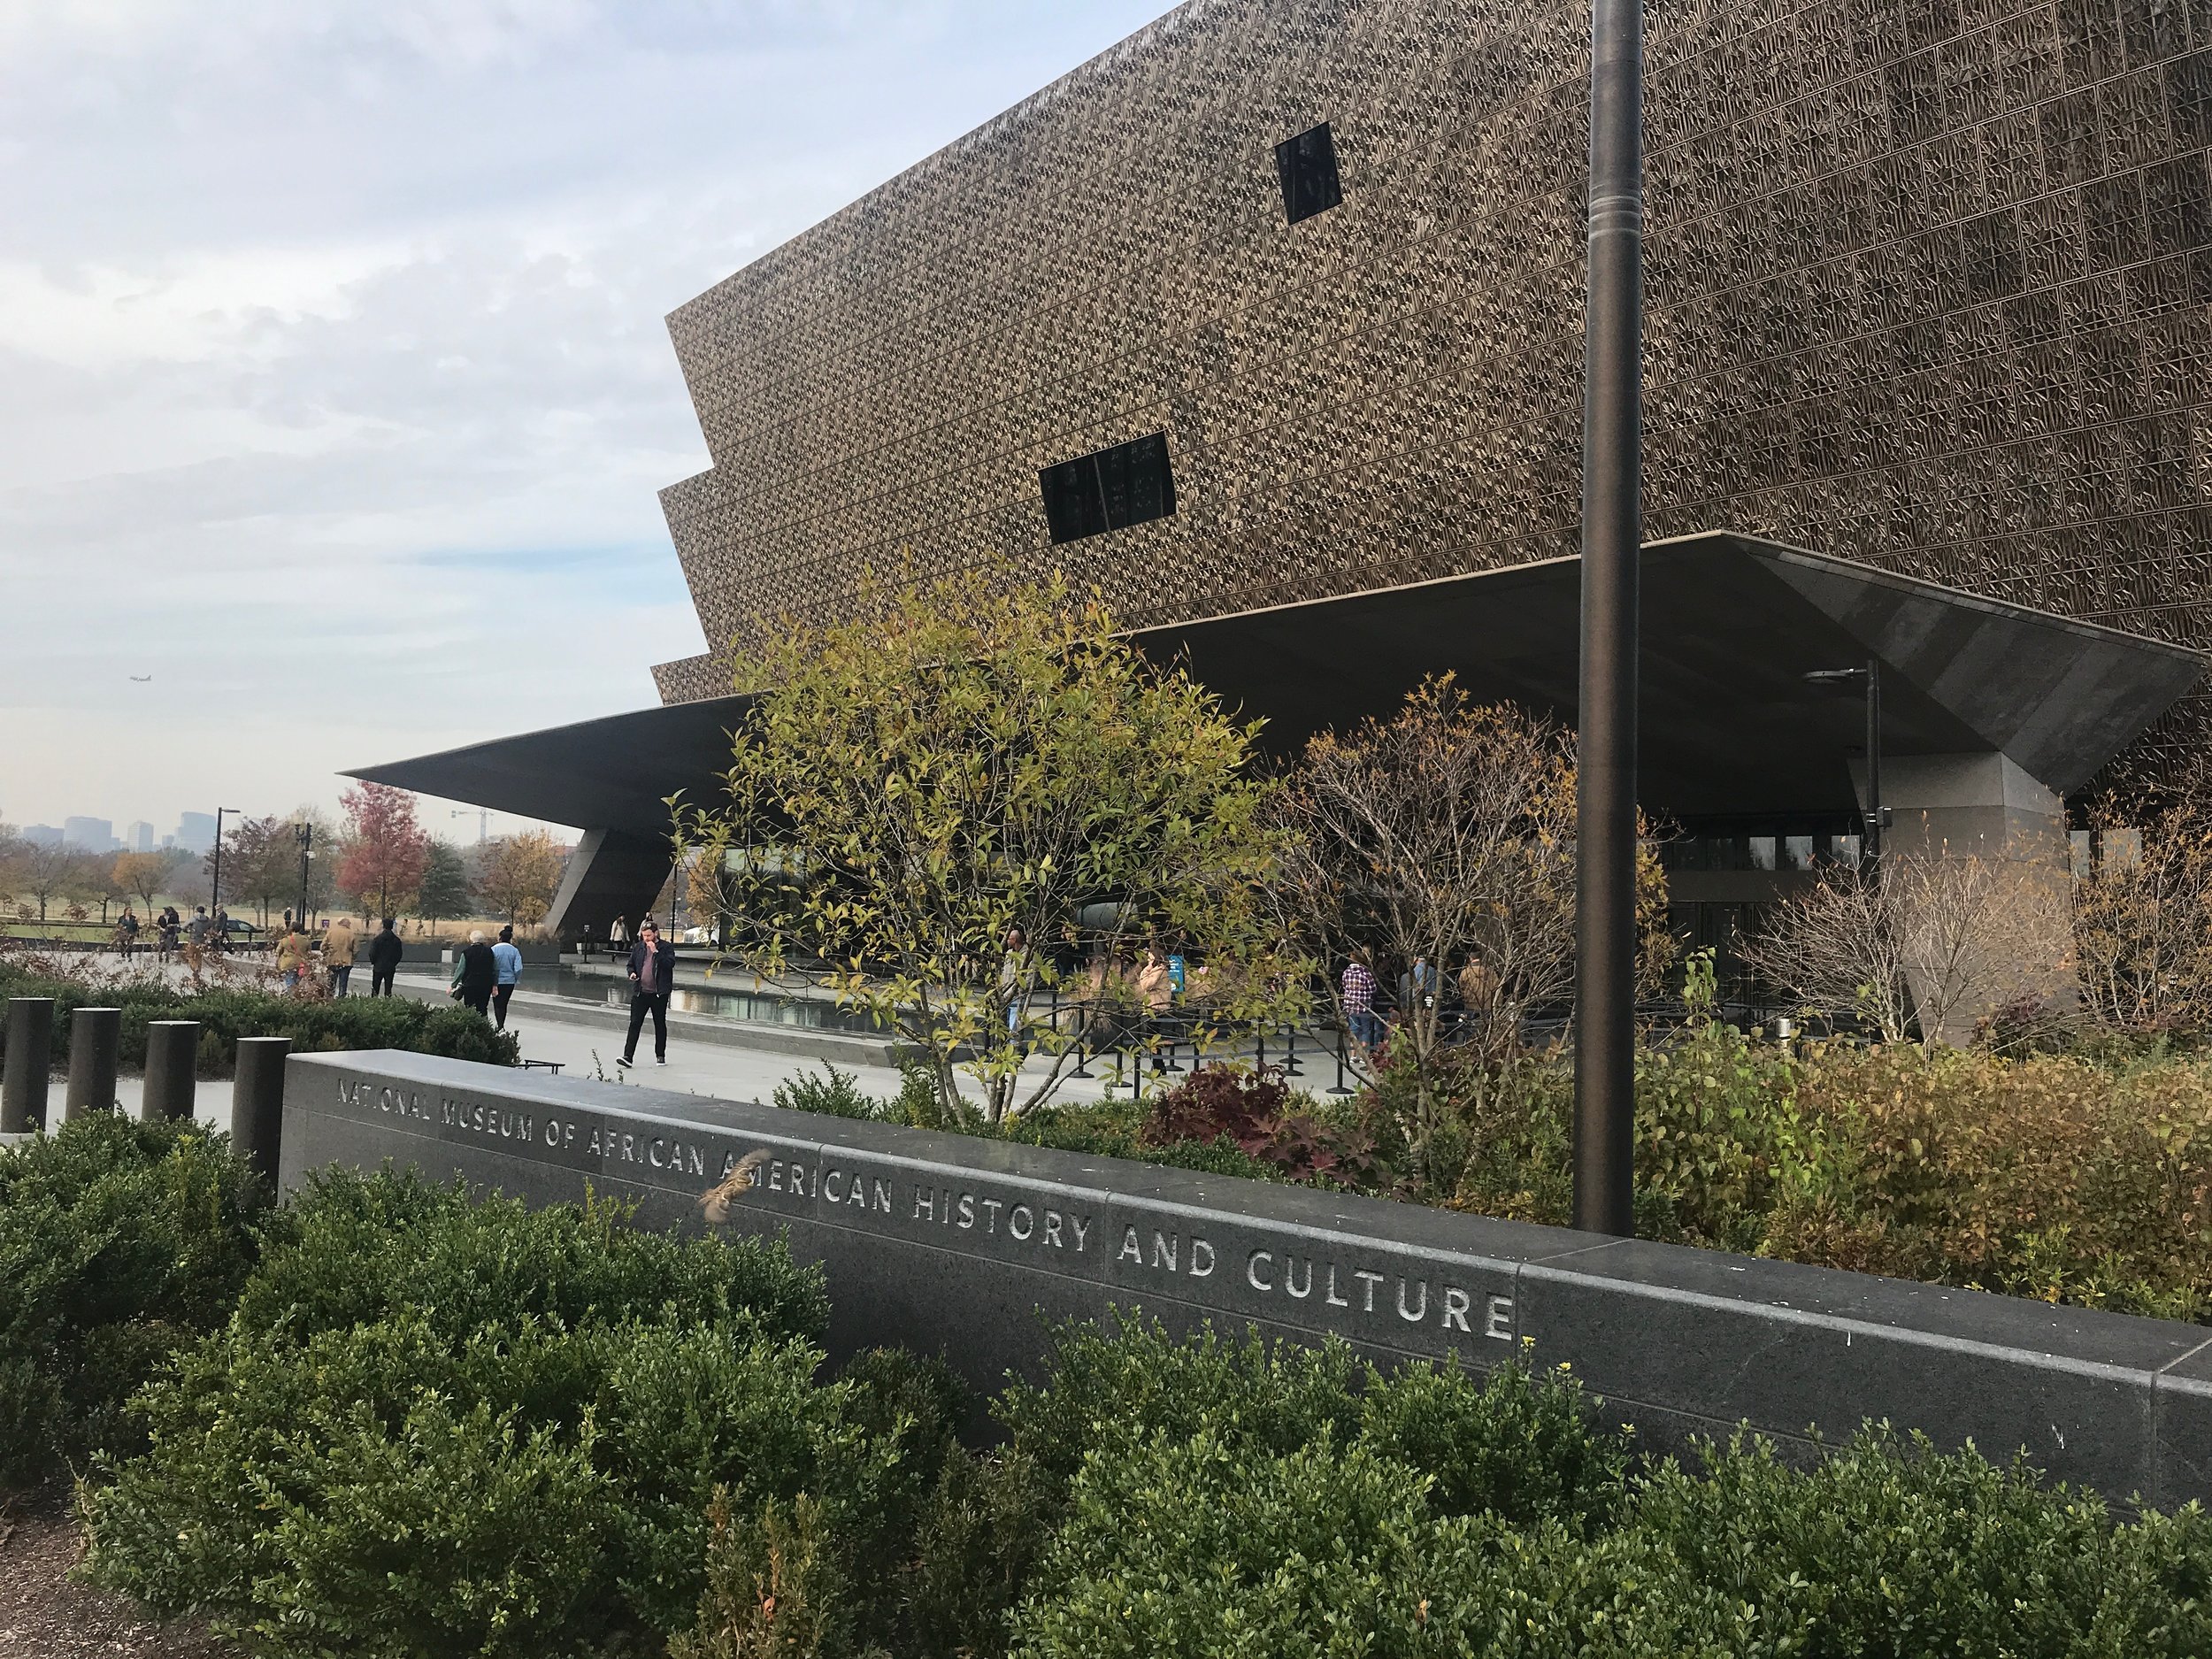  The National Museum of African American History and Culture sits on the National Mall in Washington, DC, just down the hill from the Washington Monument.      